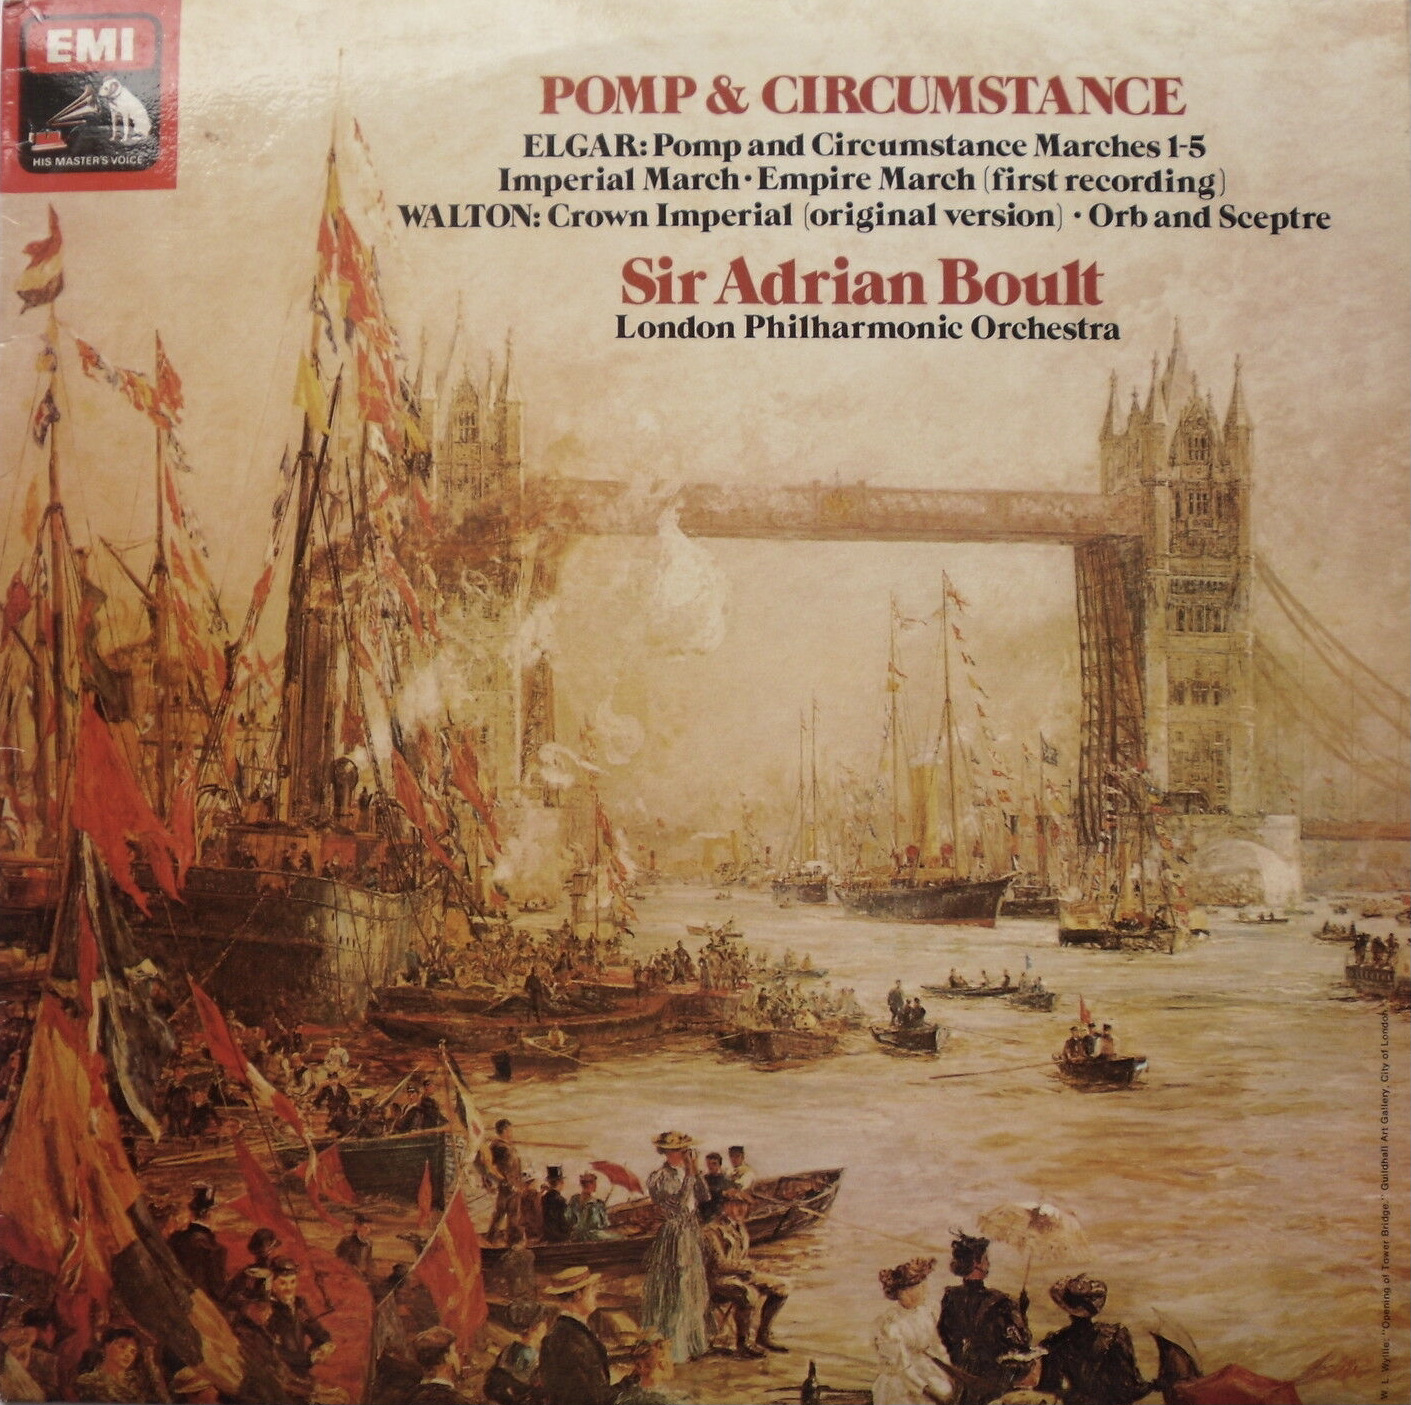 Elgar Pomp and Circumstance Marches; Walton Coronation Marches Adrian Boult